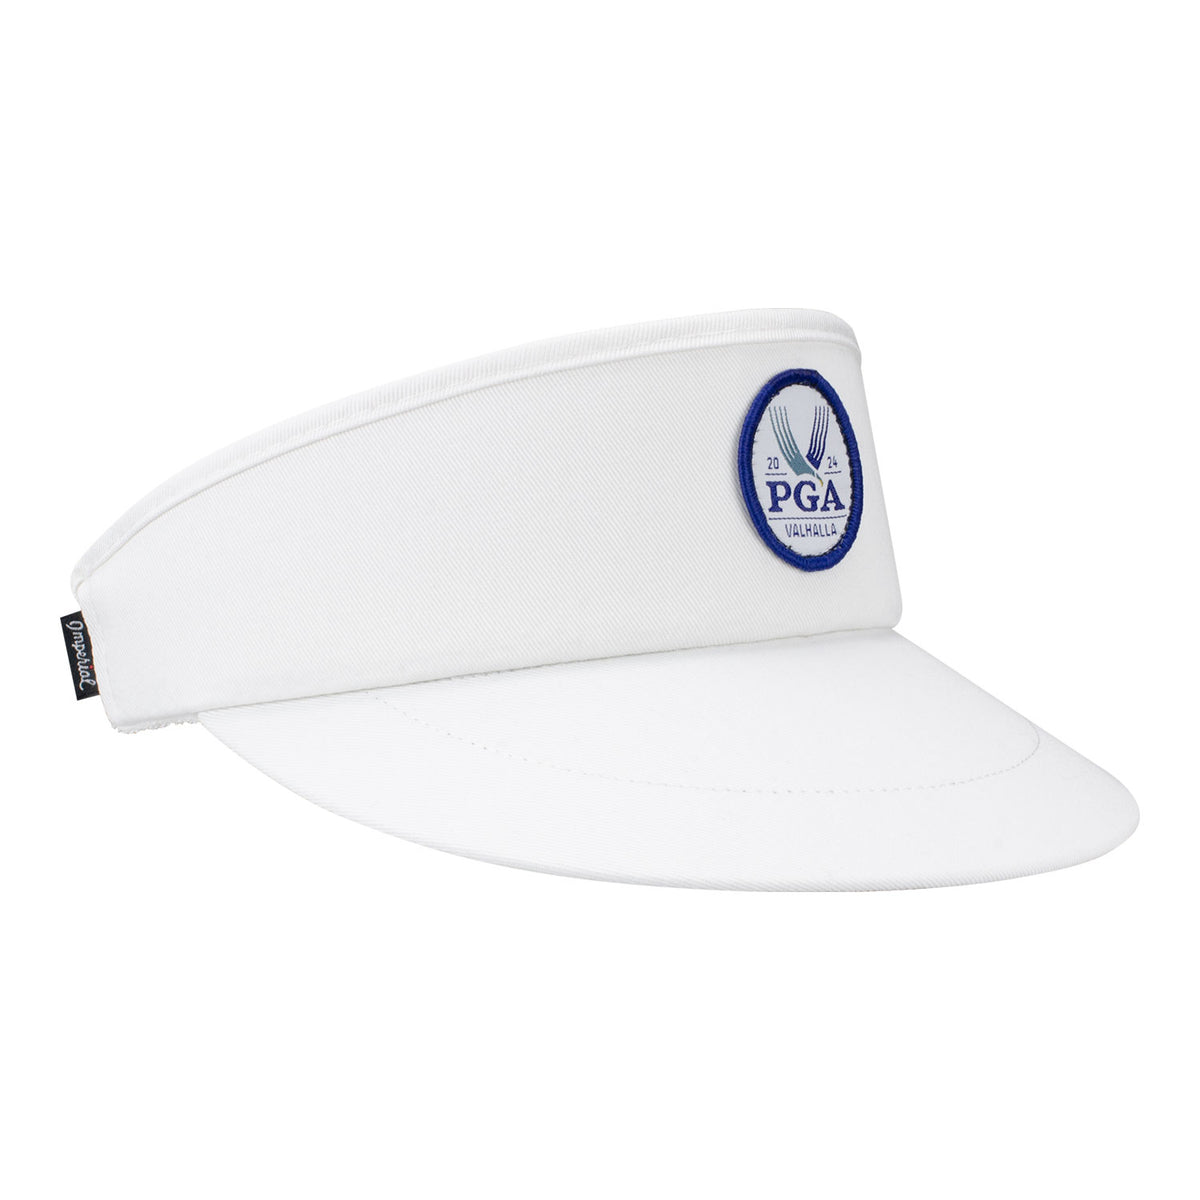 Imperial 3161 - The Original Tour Visor in White - Angled Front Right View